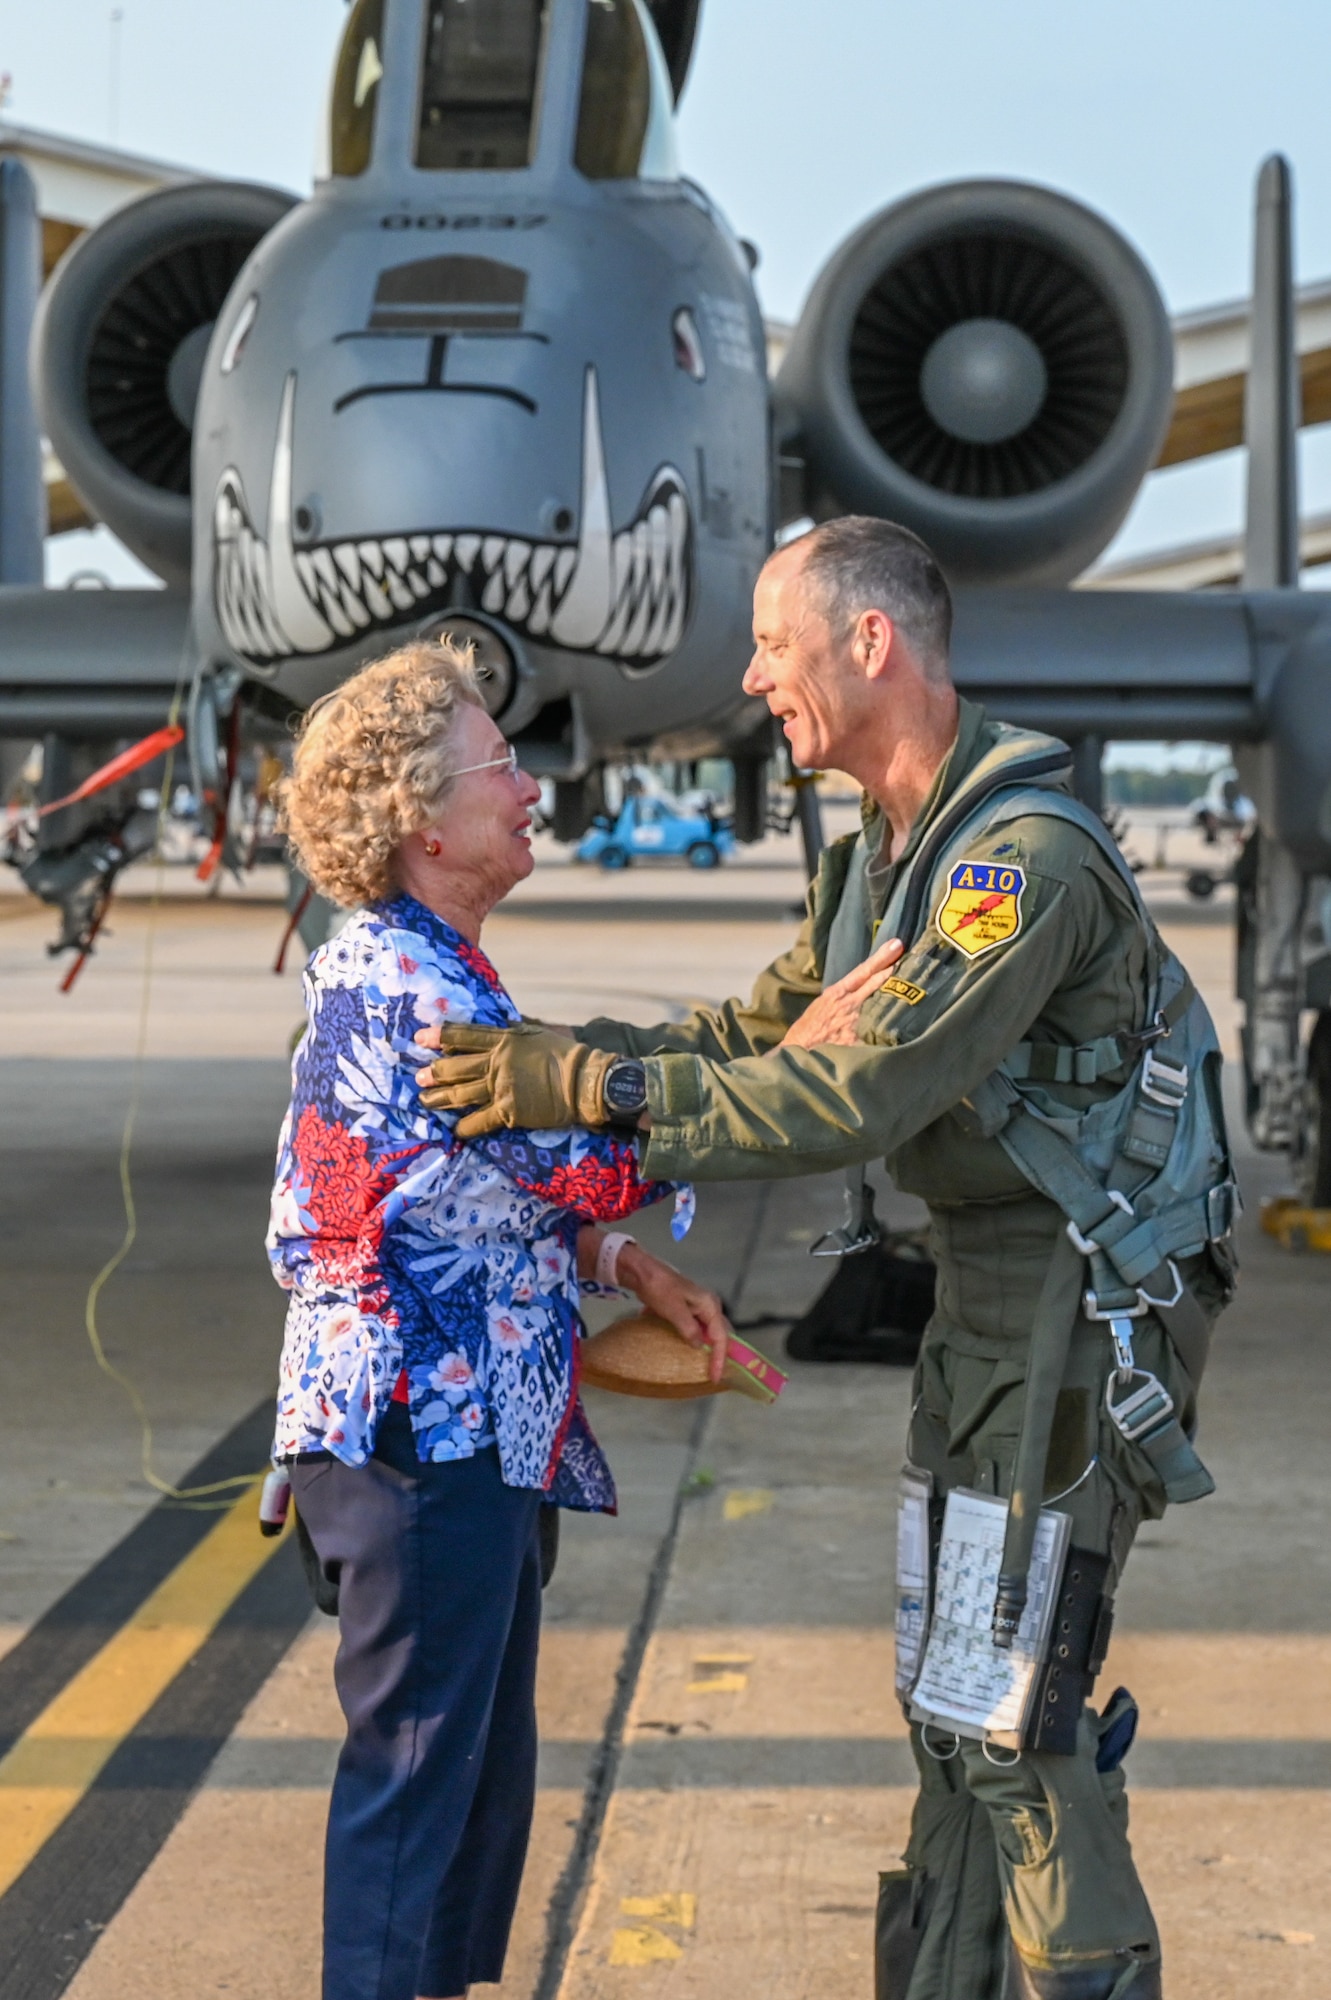 Lt. Col. John “Karl” Marks embraces his mom who was able to celebrate his 7,000 hour milestone, as well as his 6,000 hour milestone of flying the A-10C Thunderbolt II on Sept. 1, 2021 at Whiteman AFB, Mo.